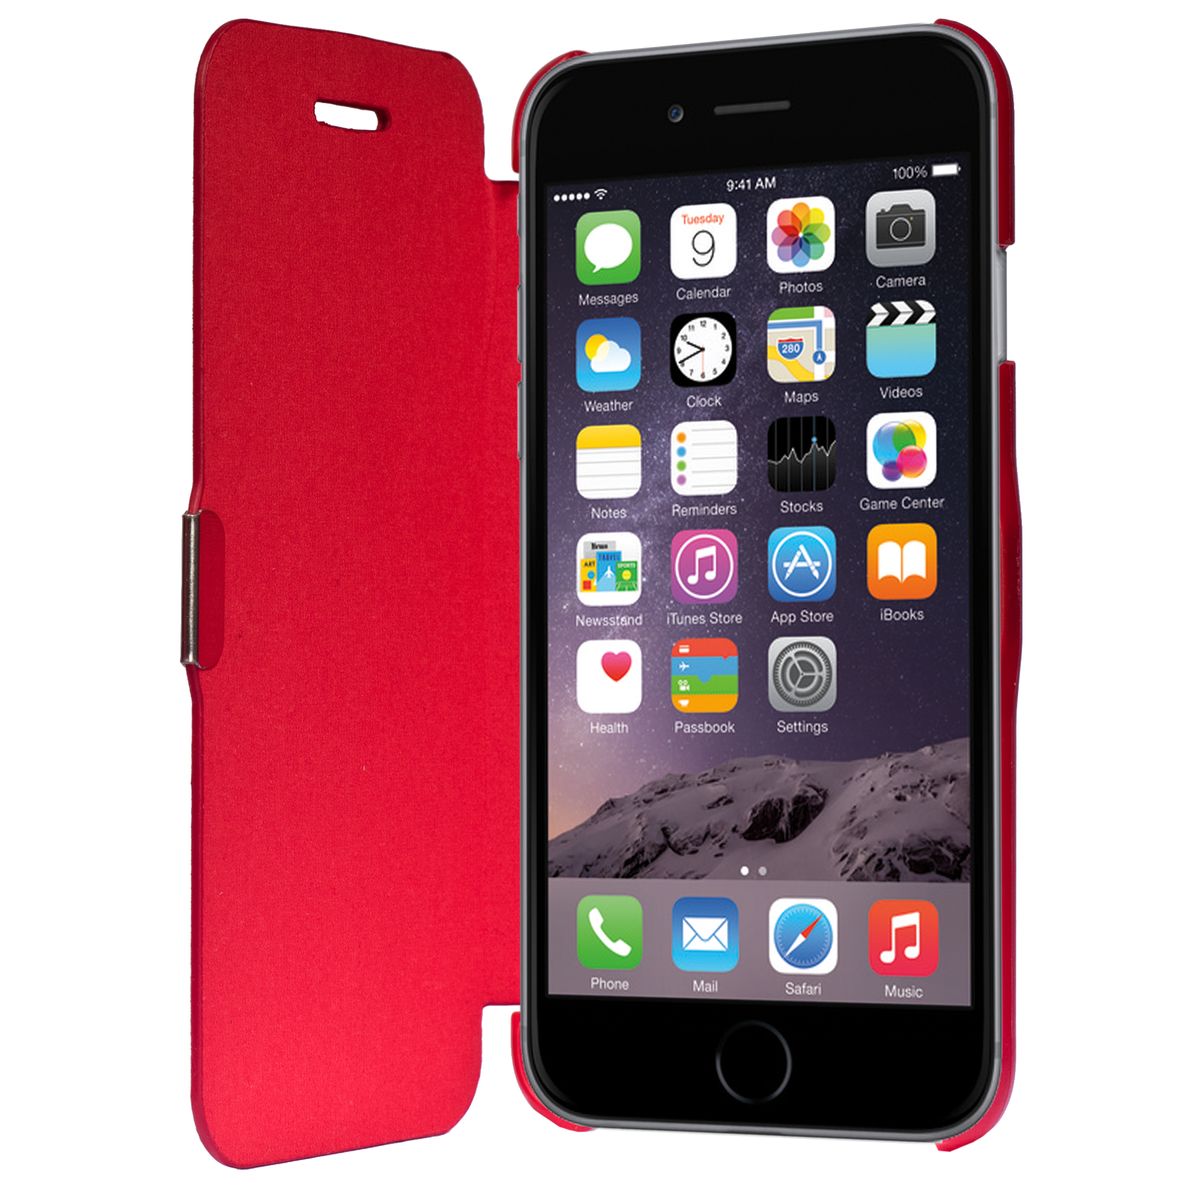 König Design flip cover protective case mobile phone case book style for Apple iPhone 6 / 6s Plus red